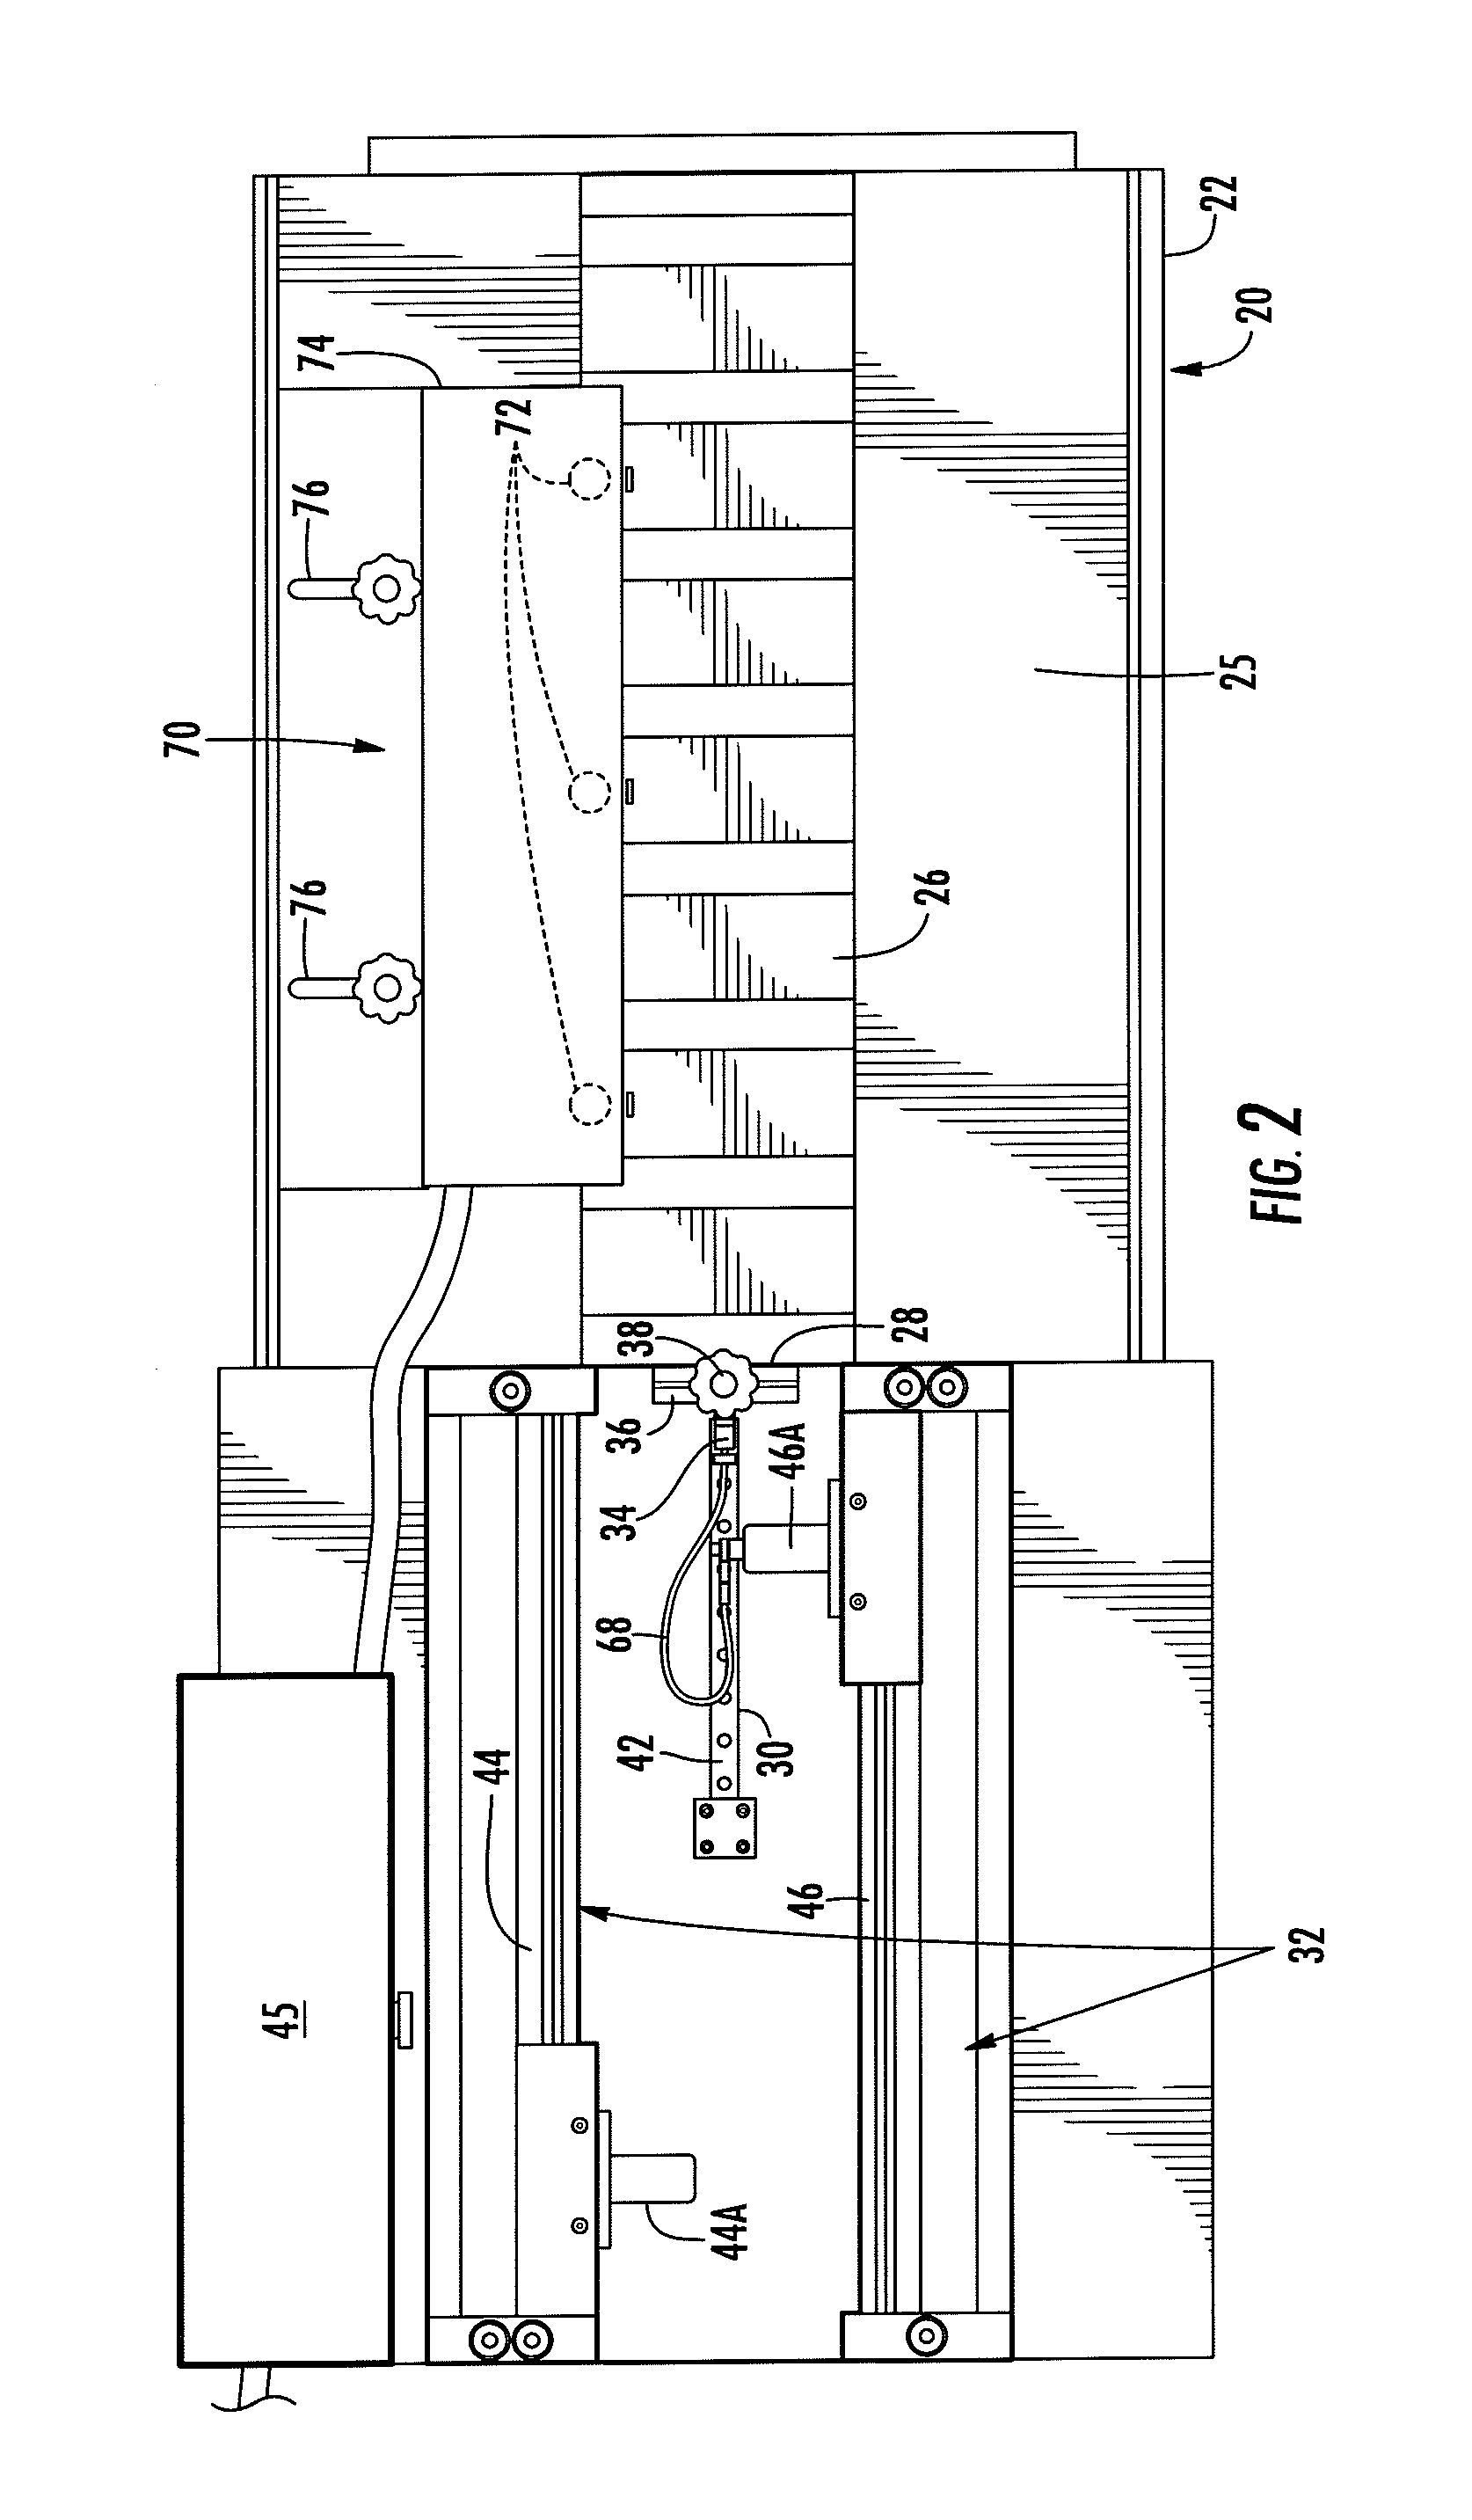 Apparatus for testing adhesion of an adhesive tape to a bonding surface under a load applied to the tape